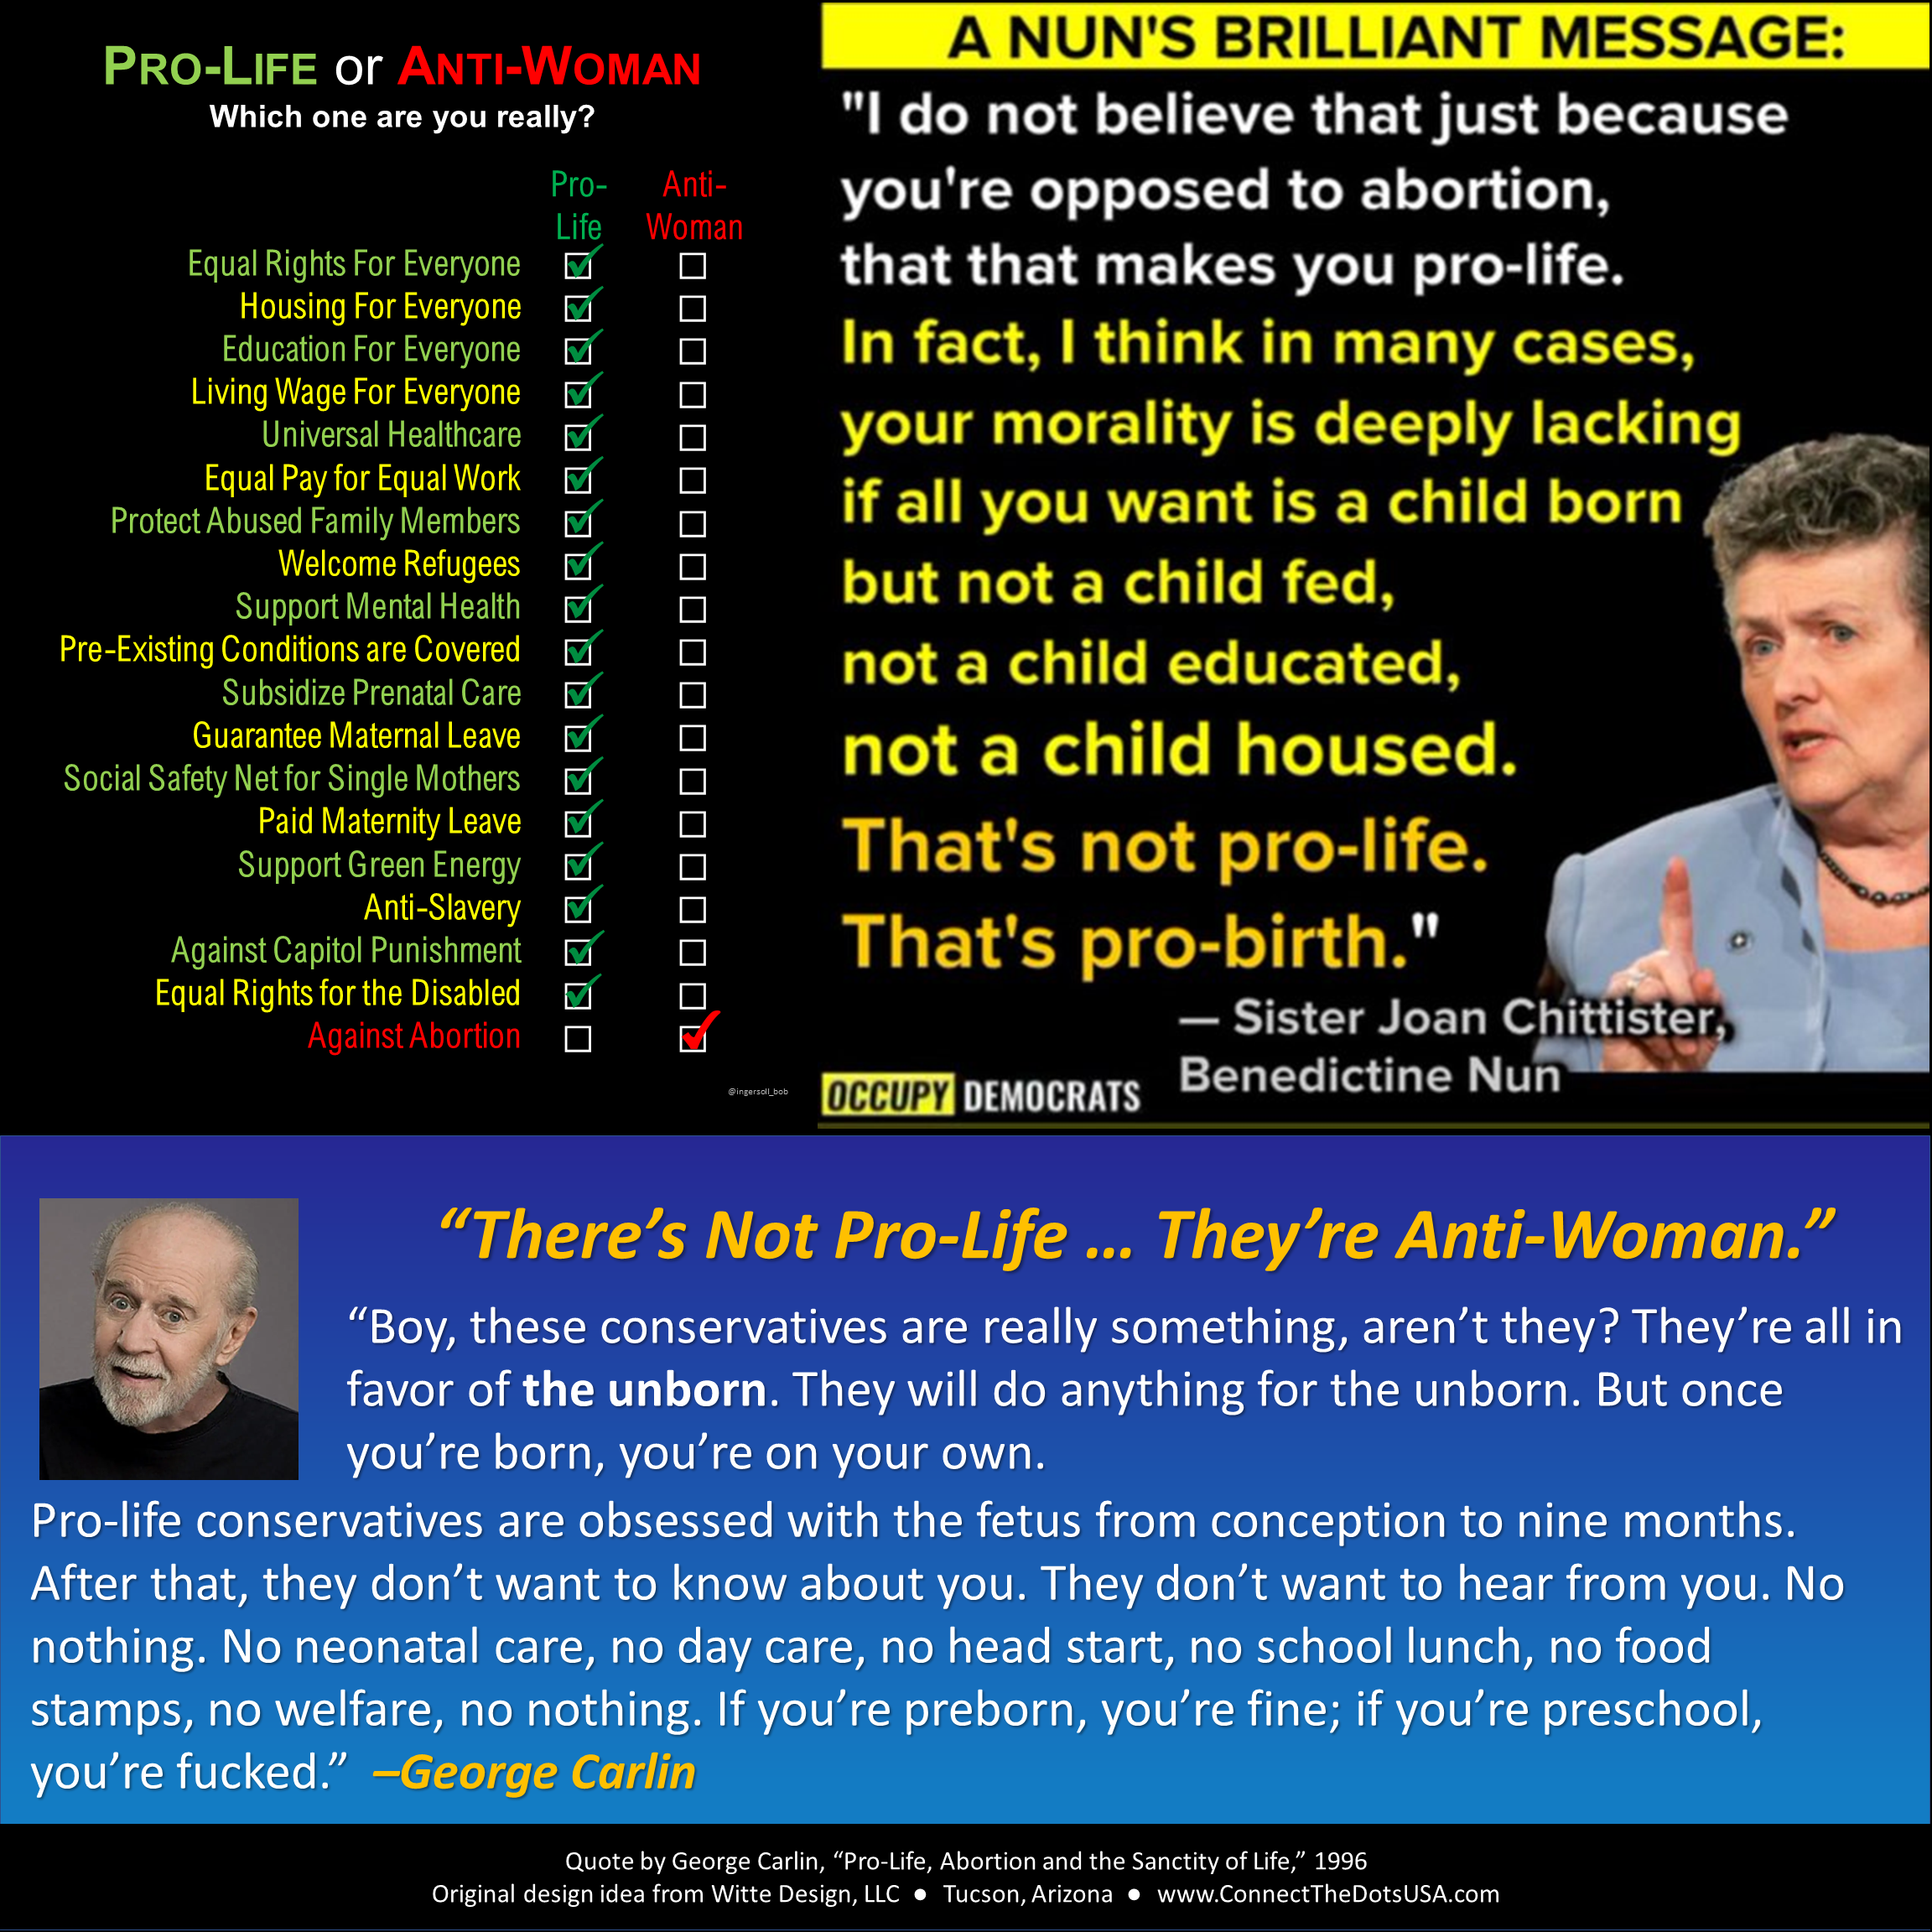 What are anti-abortionists: Pro-Existence, Pro-Beginning, or Anti-Girl?